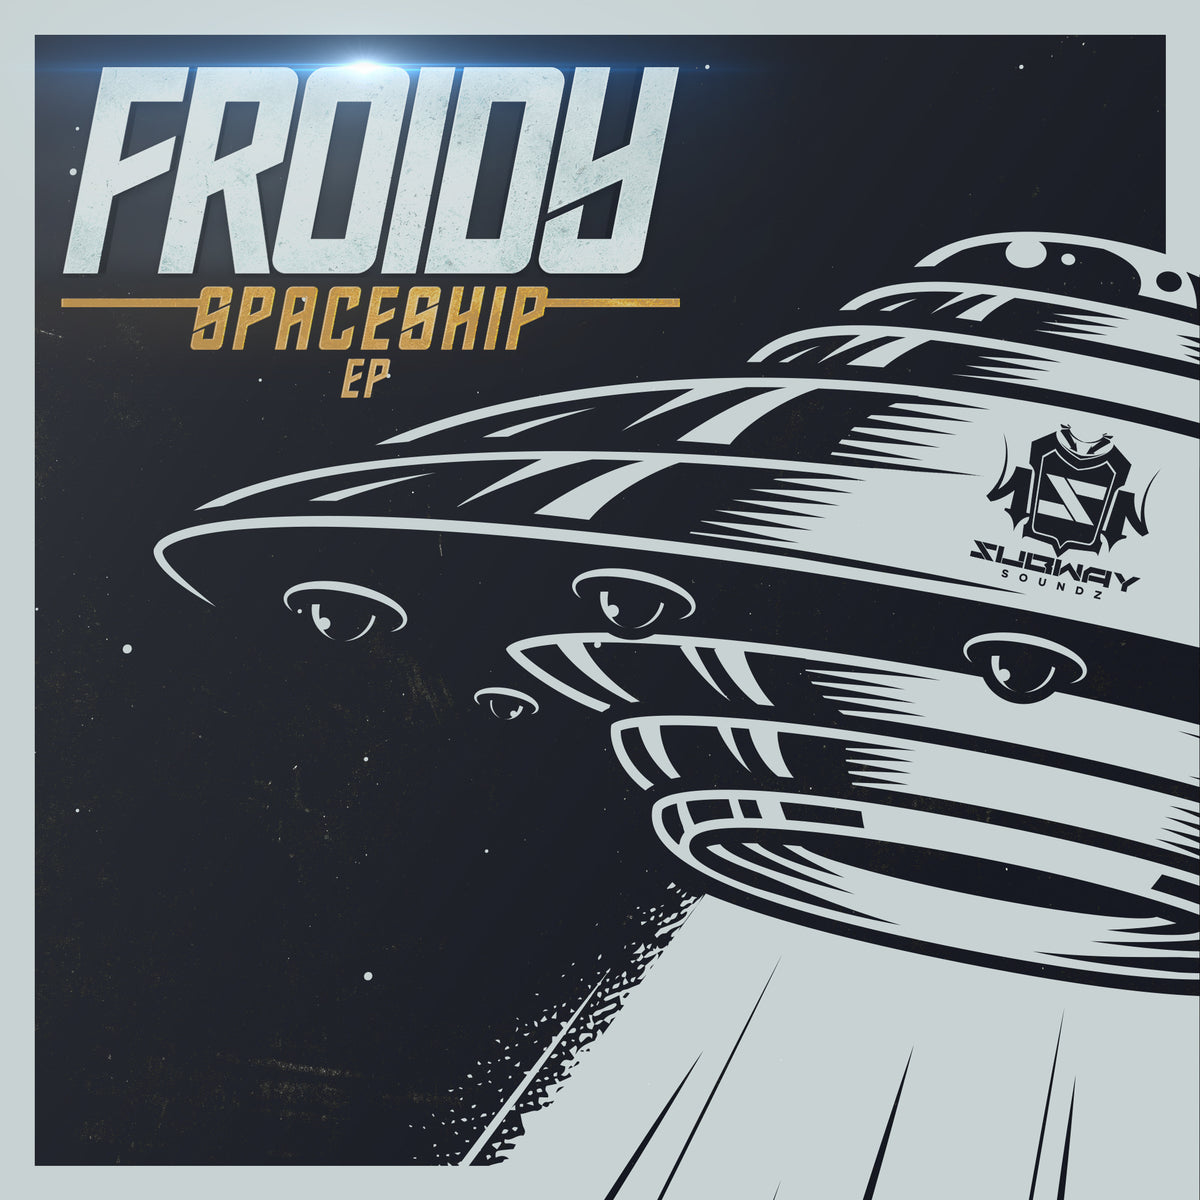 SSLD 130 - Froidy 'Spaceship EP'